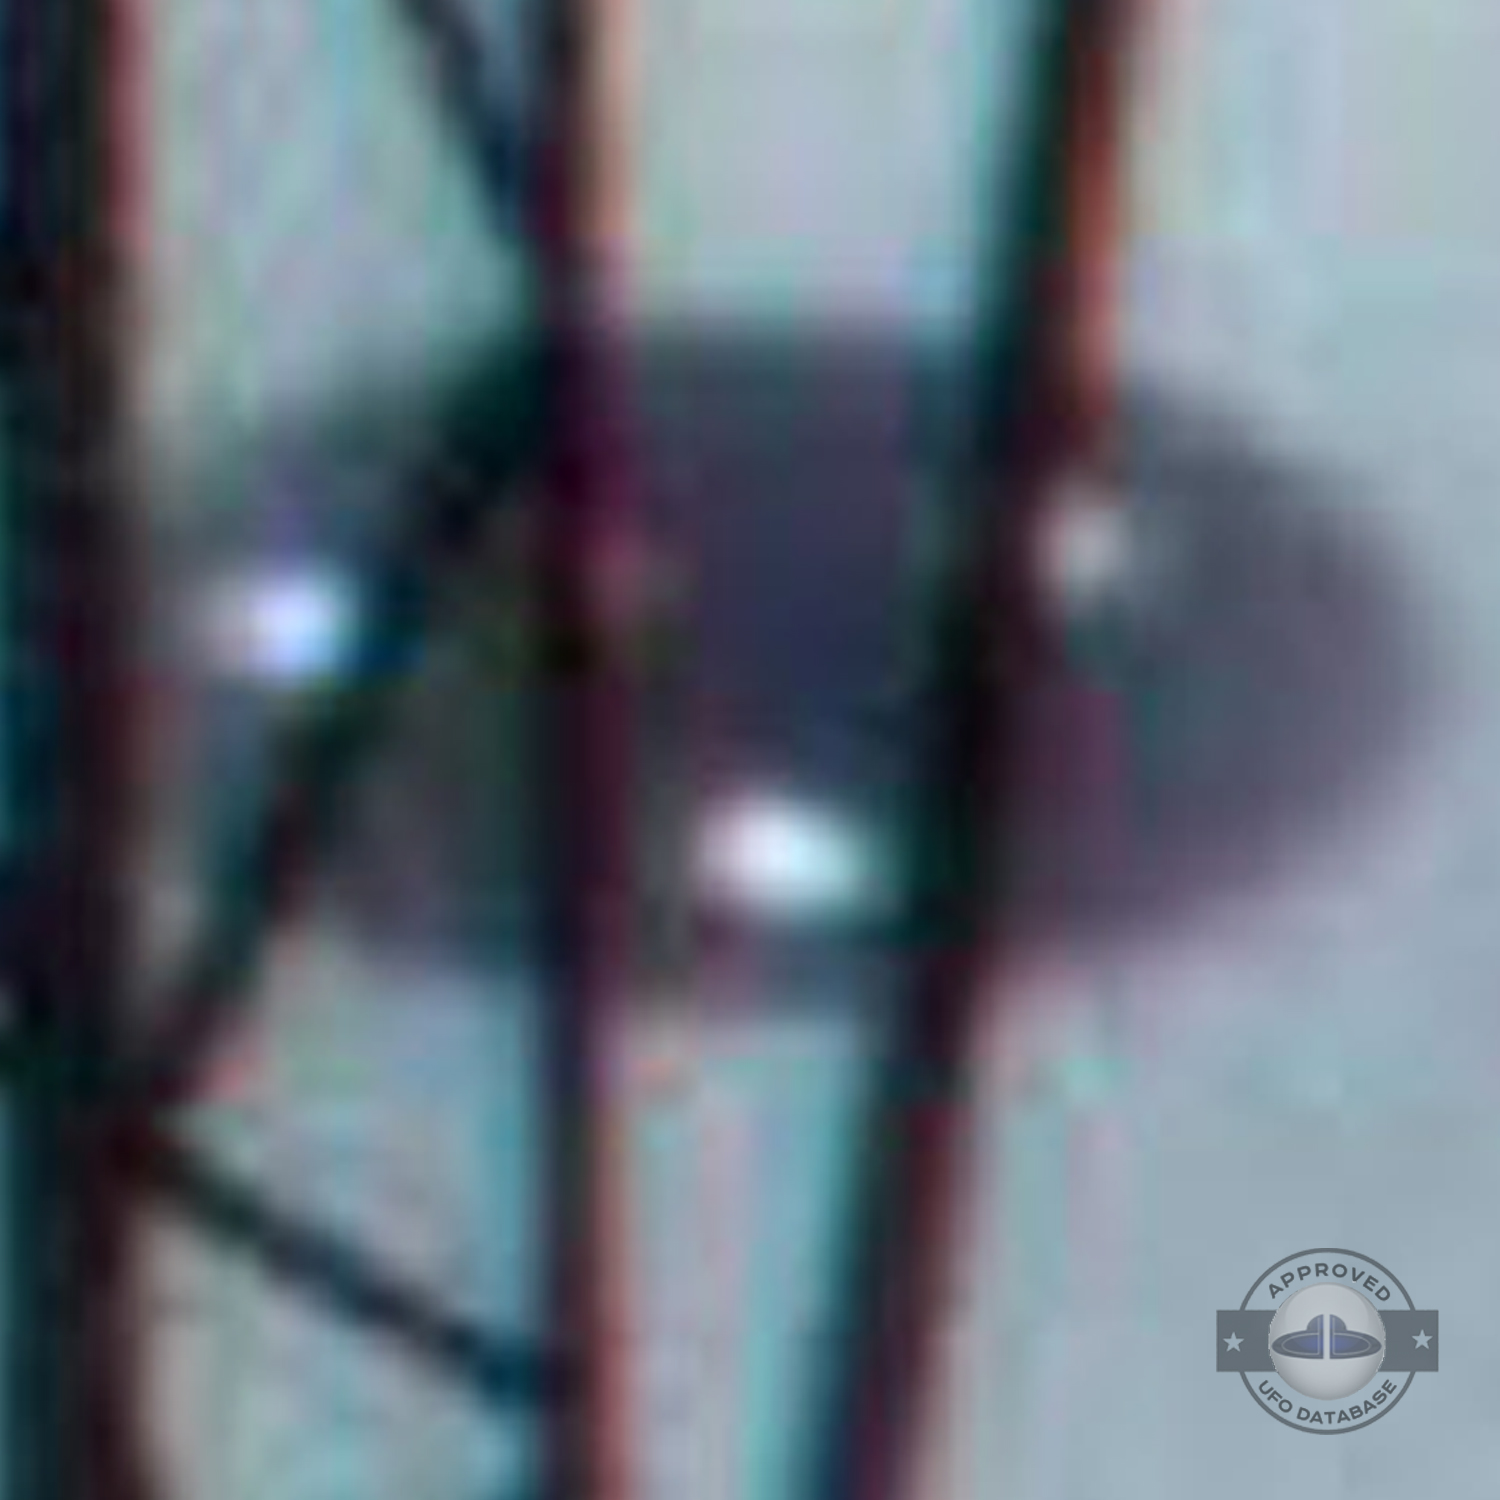 Witness of UFO get pulsating vibrations in Wurzburg, Germany 2009 UFO Picture #216-5